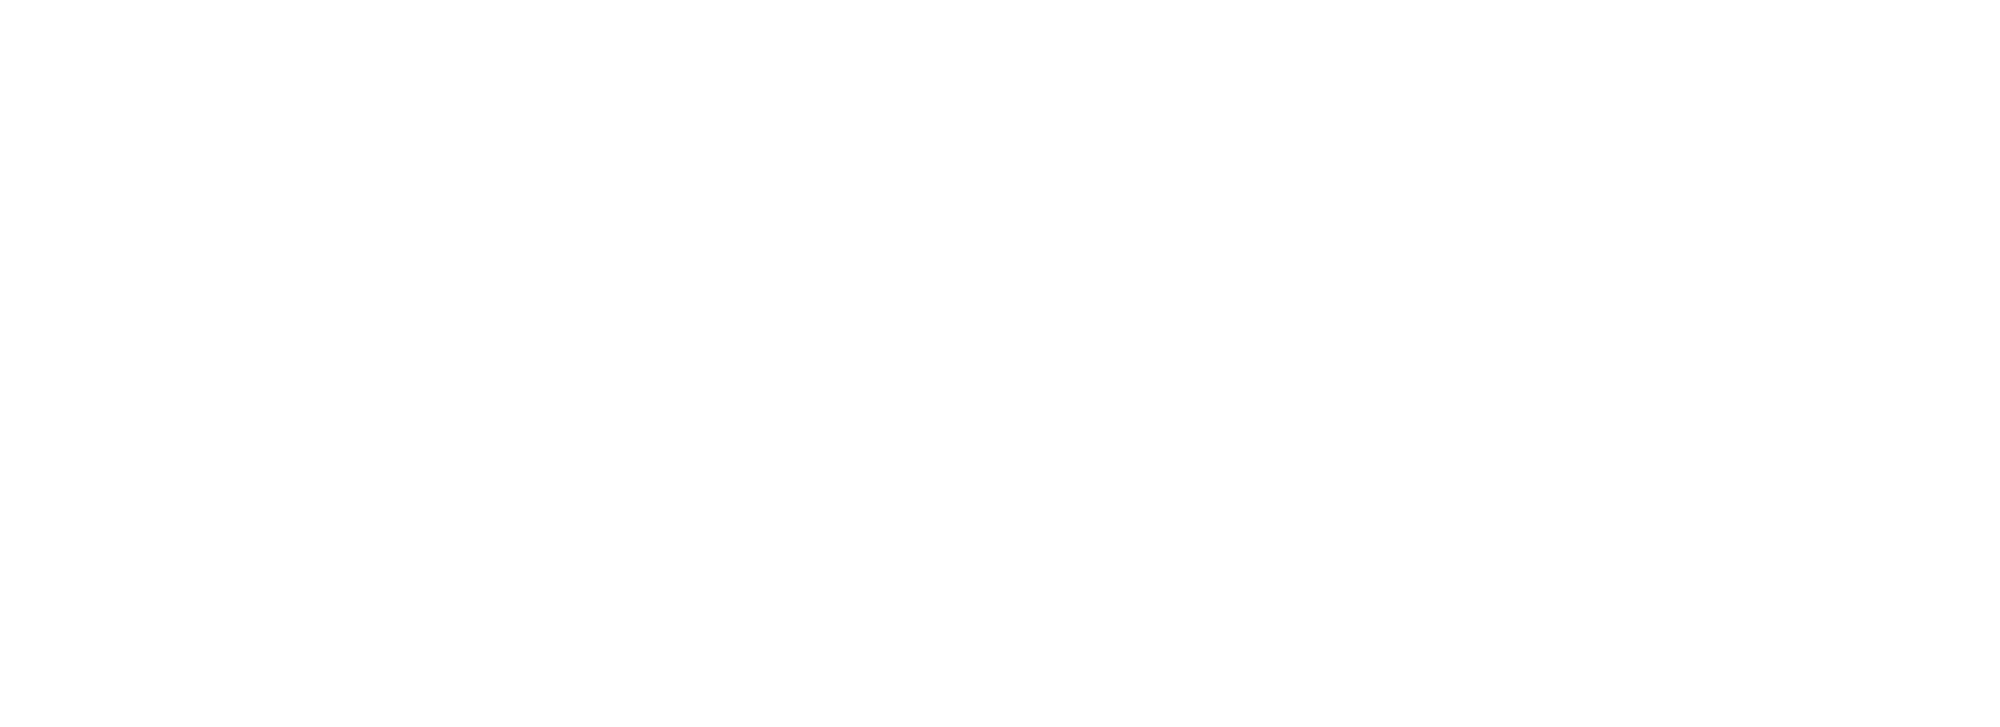 Investing our energy in your energy